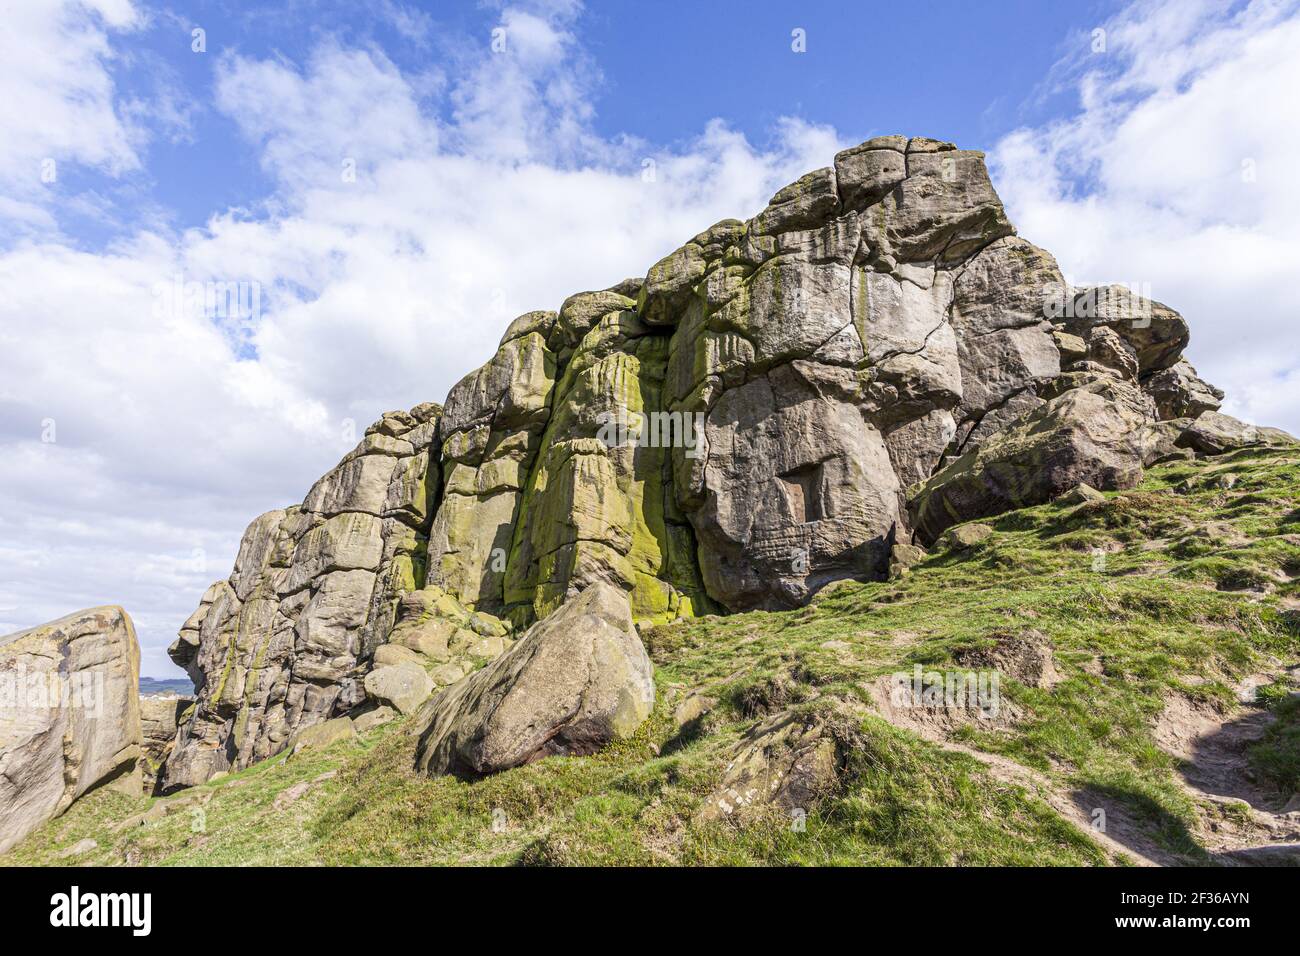 Almscliff Crag, a Millstone Grit outcrop near North Rigton, between Leeds and Harrogate, North Yorkshire UK Stock Photo